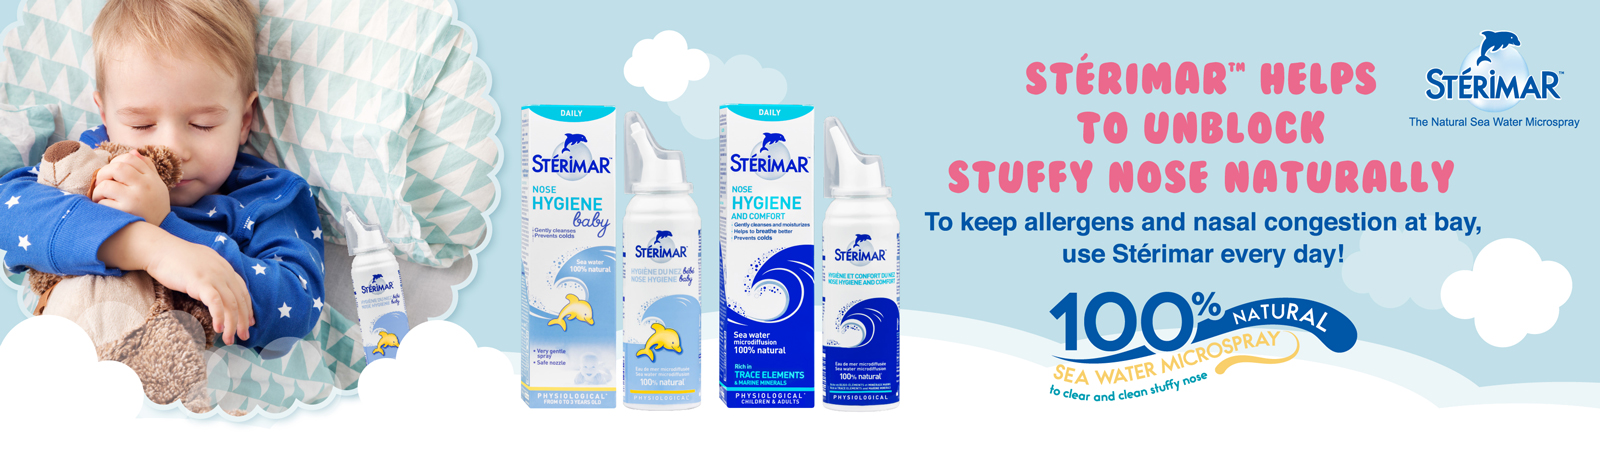 STERIMAR Nose Hygiene and Comfort: Breathe with ease and feel the difference!